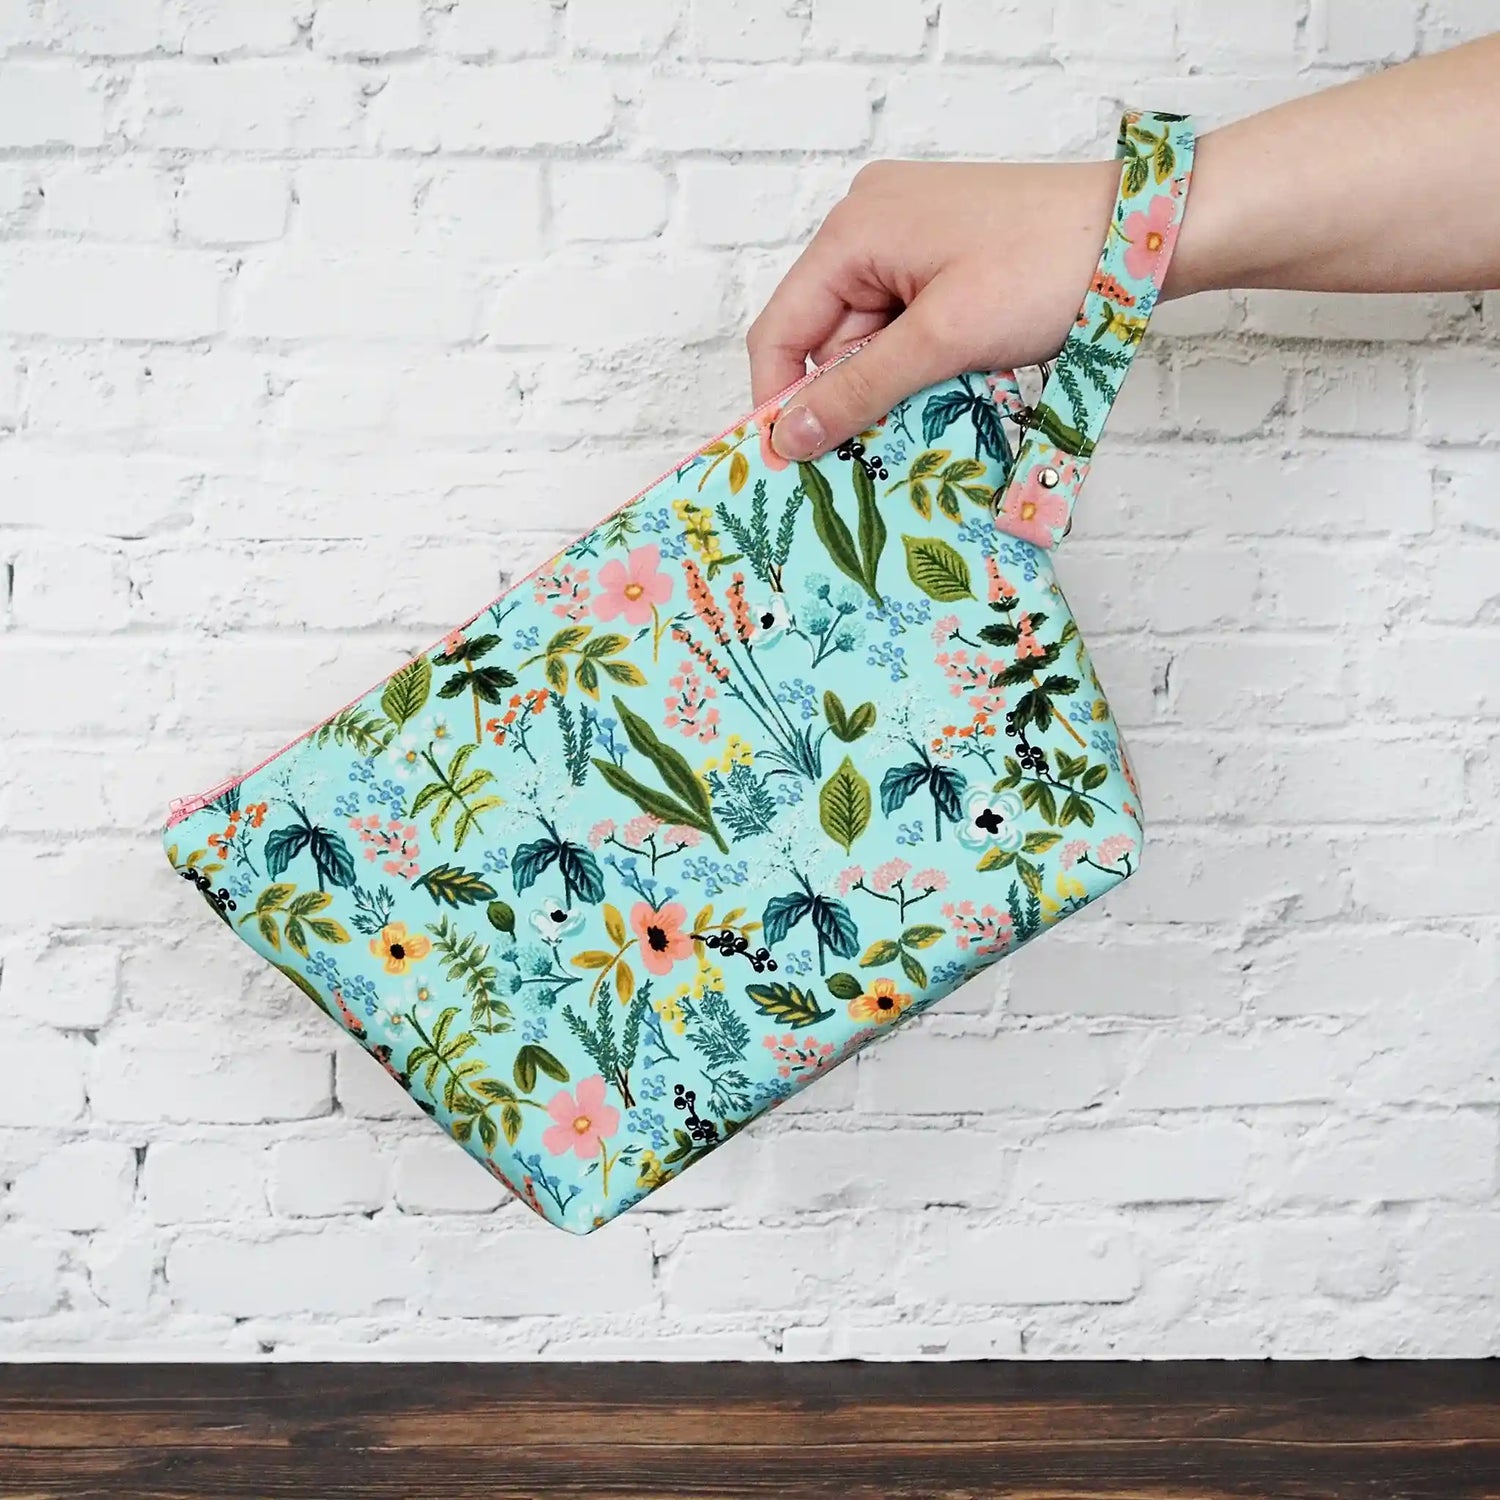 Aqua floral zippered project bag with wrist strap.  Made in Canada by Yellow Petal Handmade.